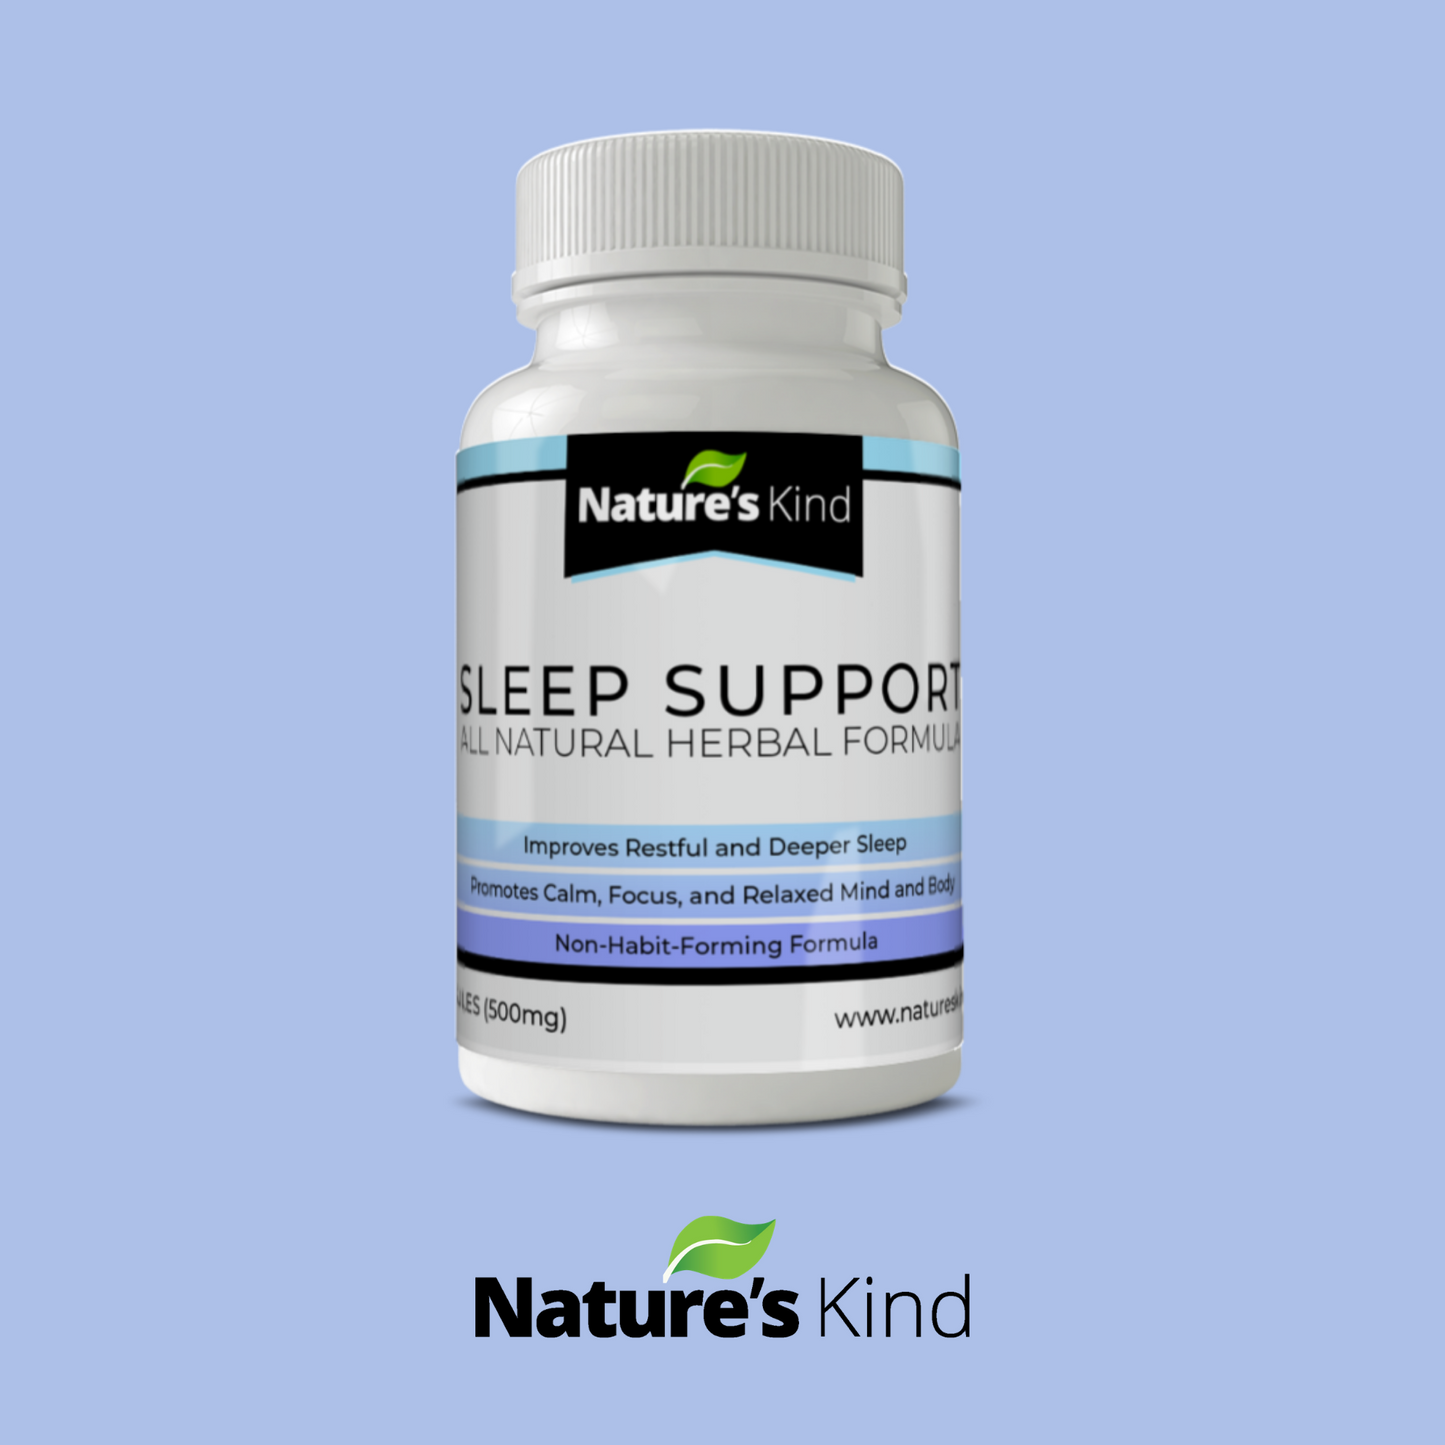 Sleep Support Supplement - with 4 Best HERBS to RELAX Mind and Body